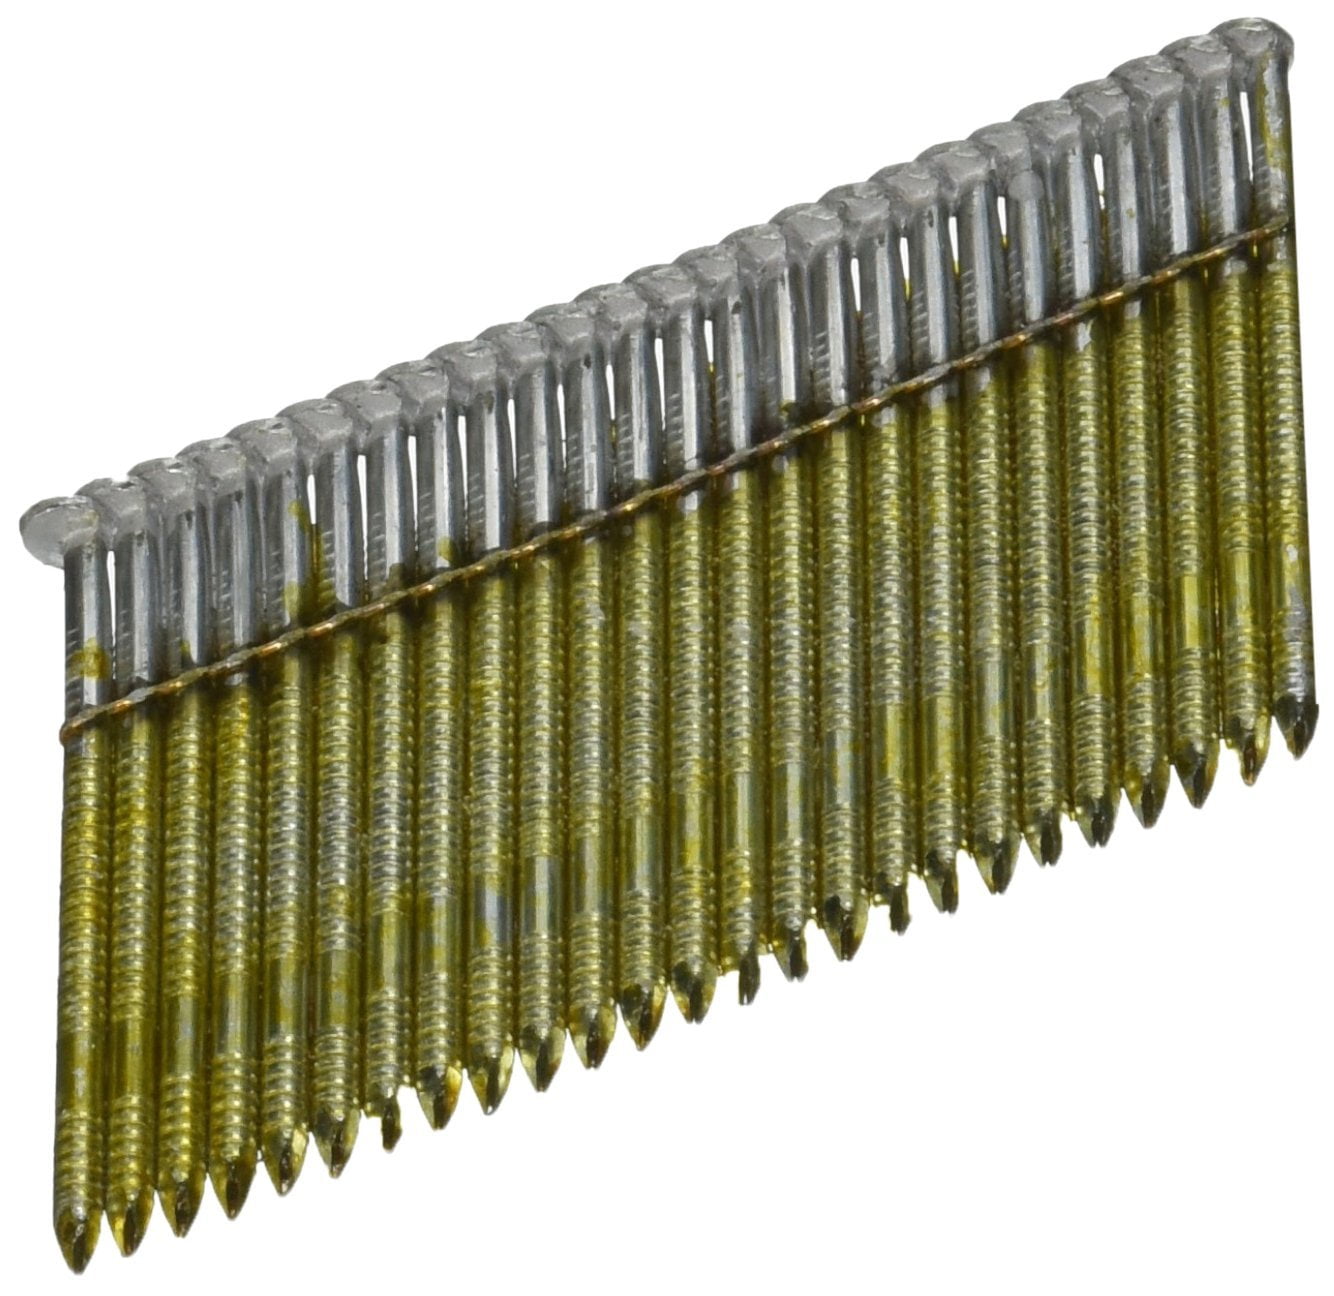 P CANADA 1-1/4-inch Roofing Nails Electro Galvanized-30lbs (approx. 6228  pieces) | eBay